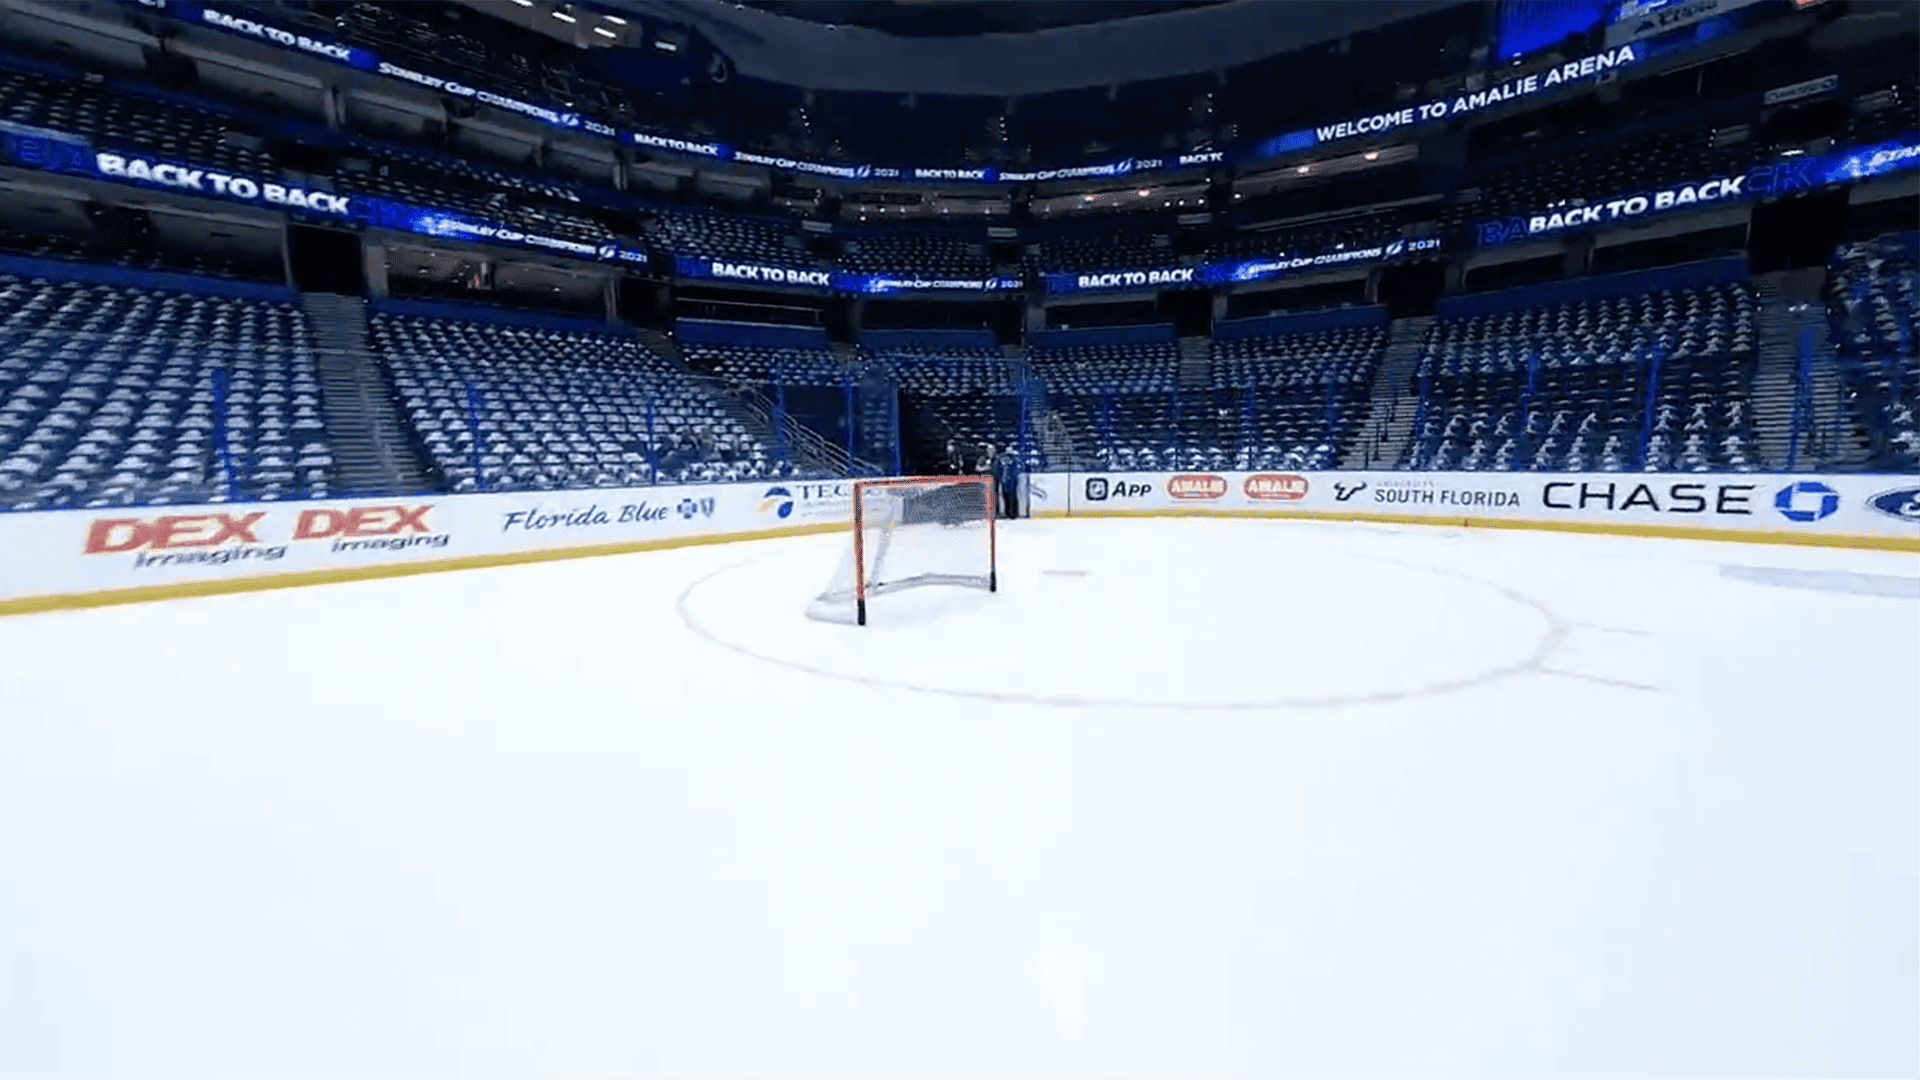 first person view on the ice at a NHL arena